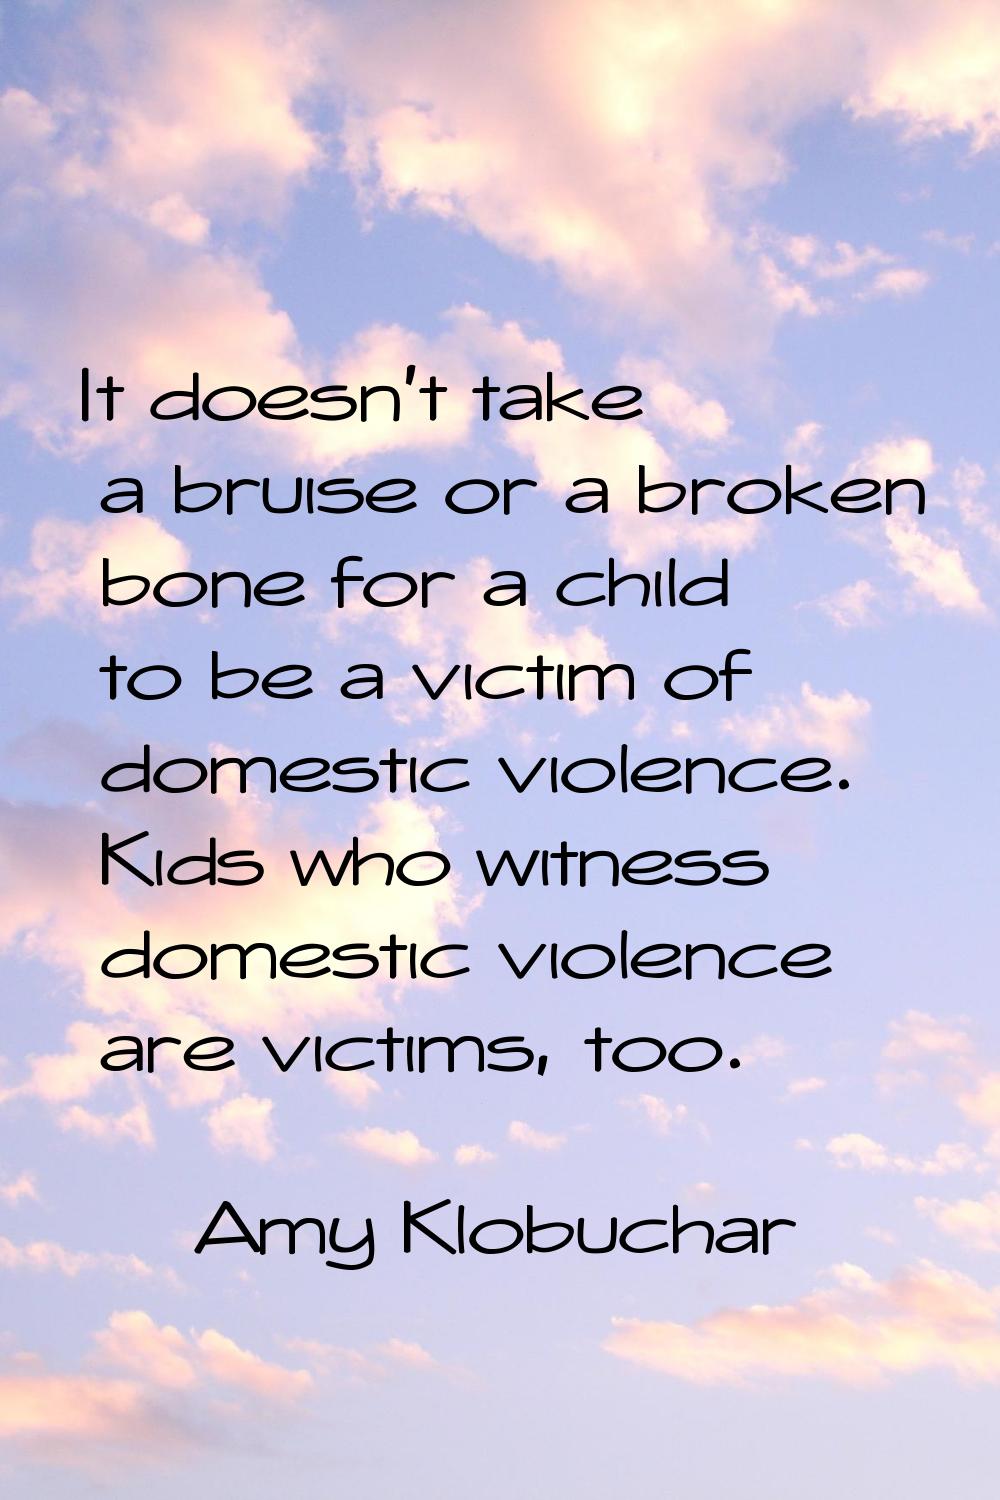 It doesn't take a bruise or a broken bone for a child to be a victim of domestic violence. Kids who